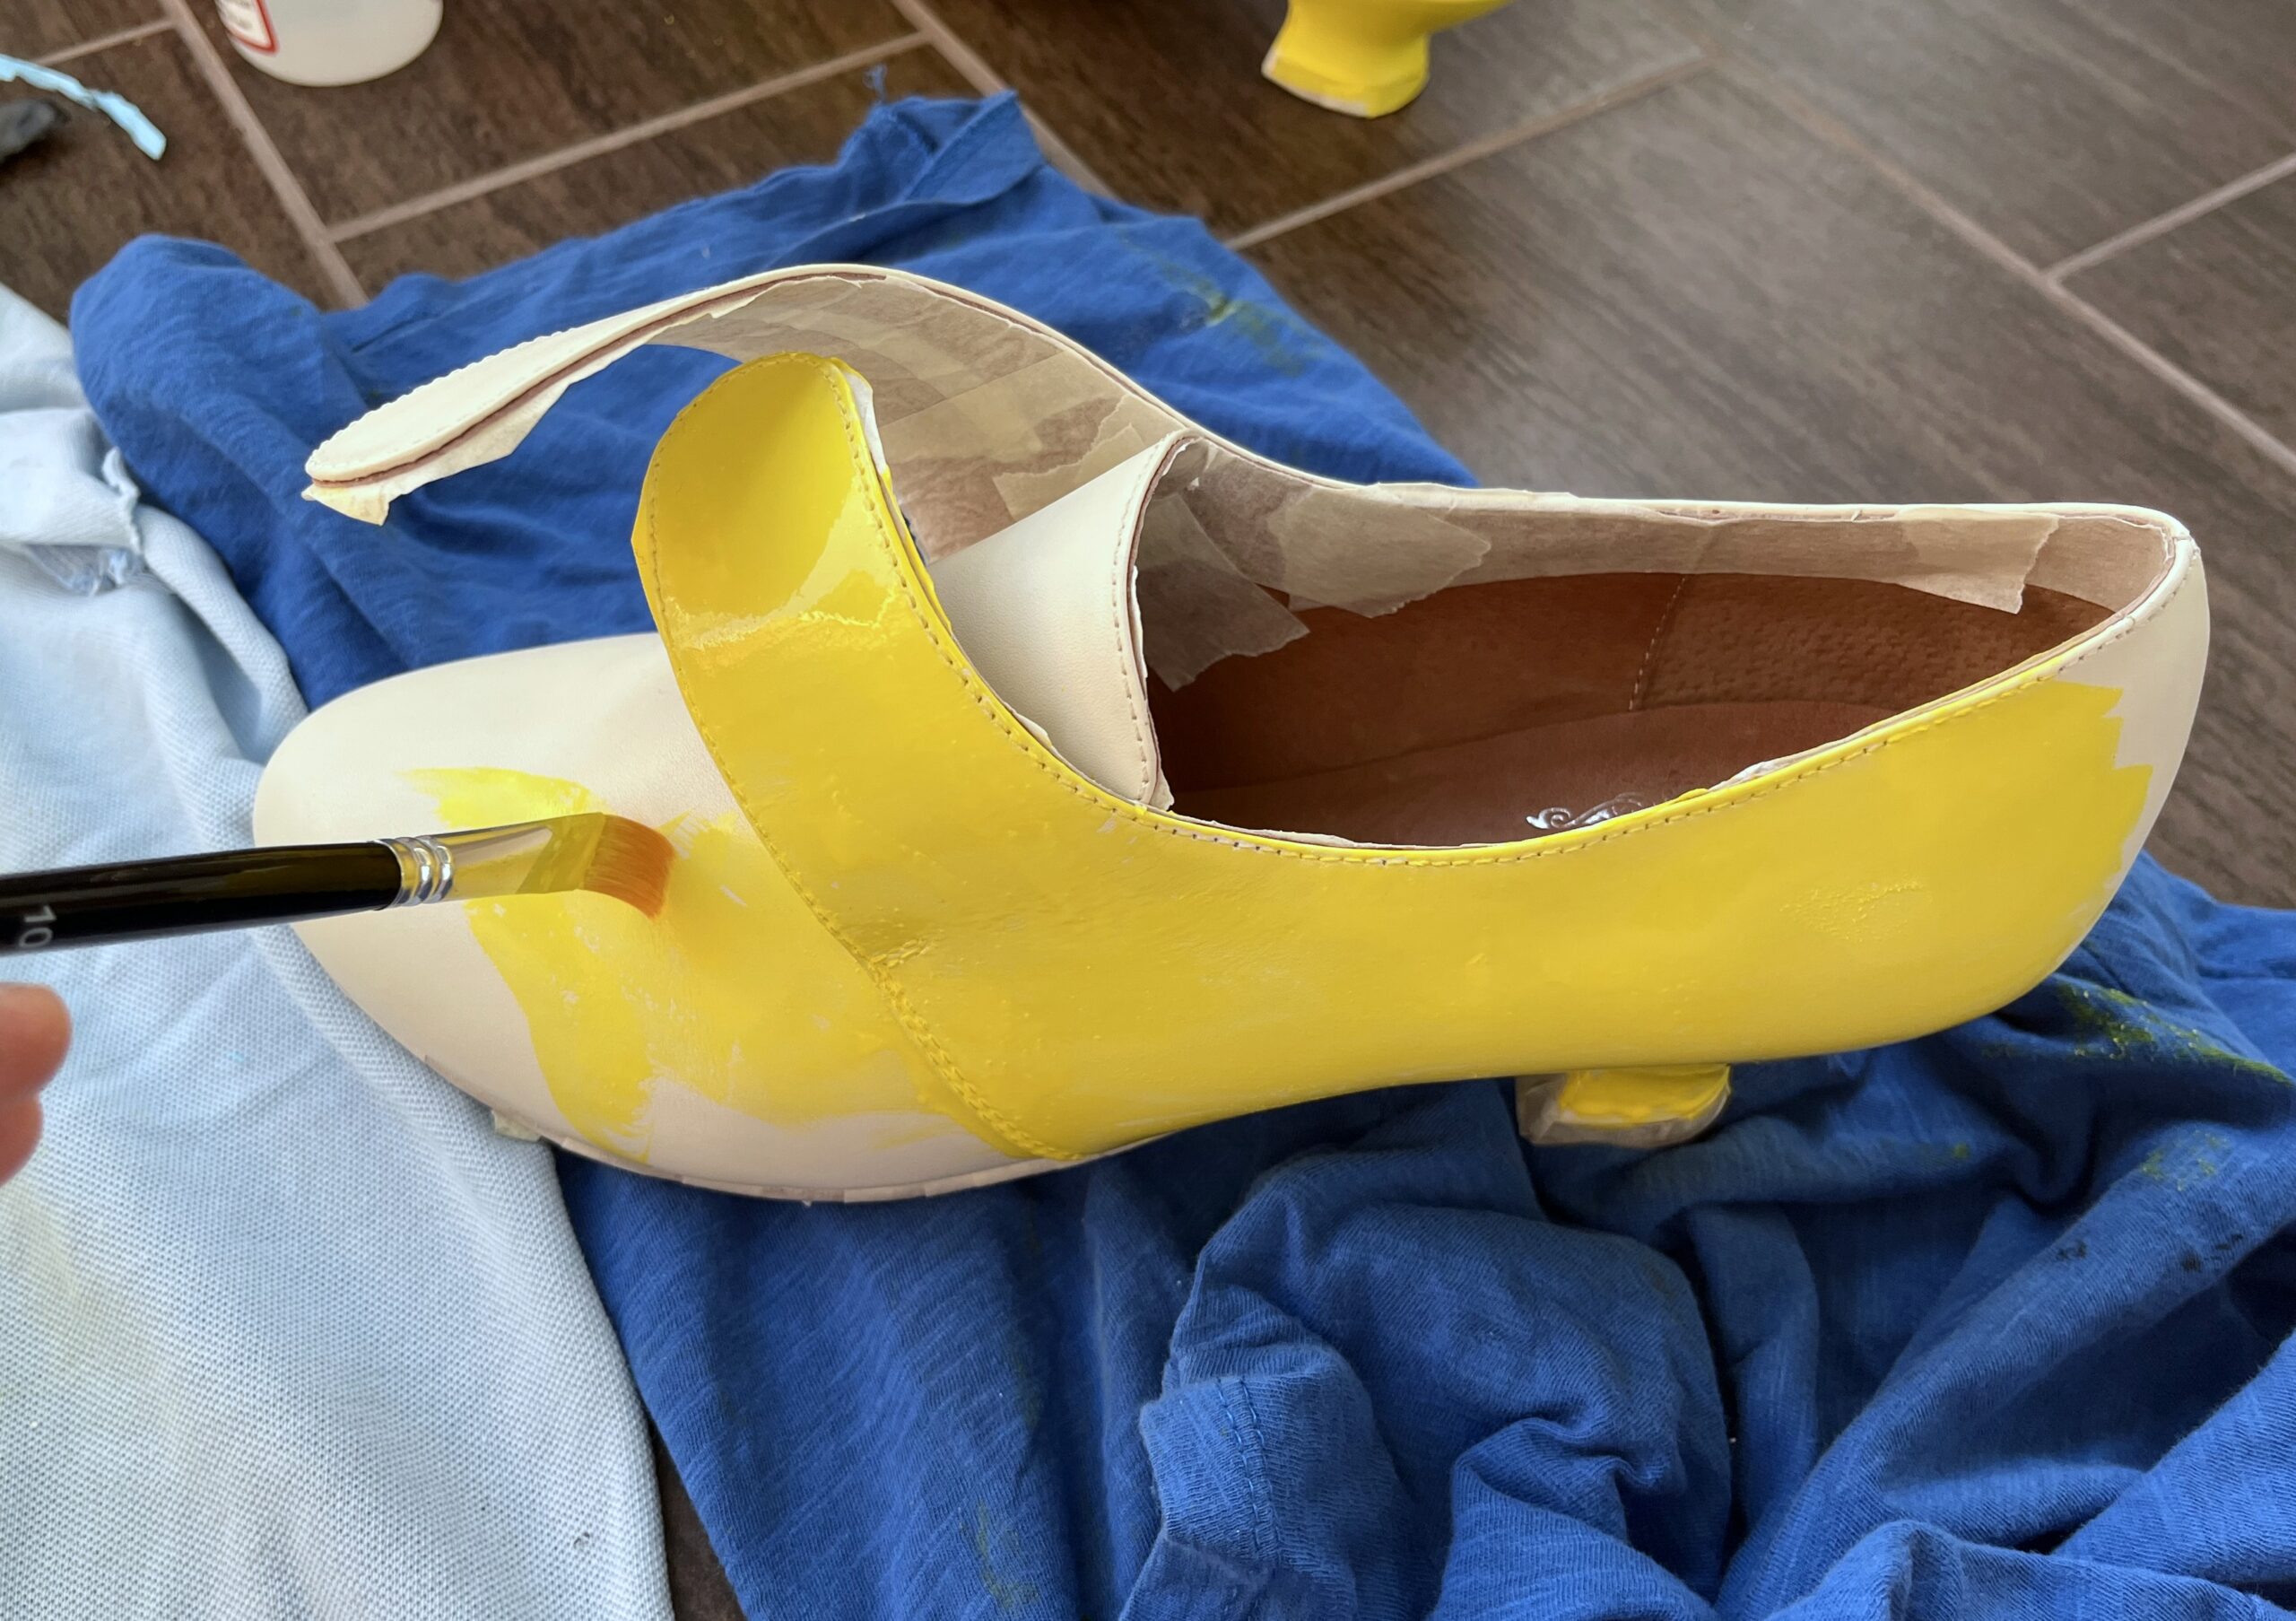 A brush painting streaks of bright yellow paint onto the toe of a white American Duchess Kensington shoe.